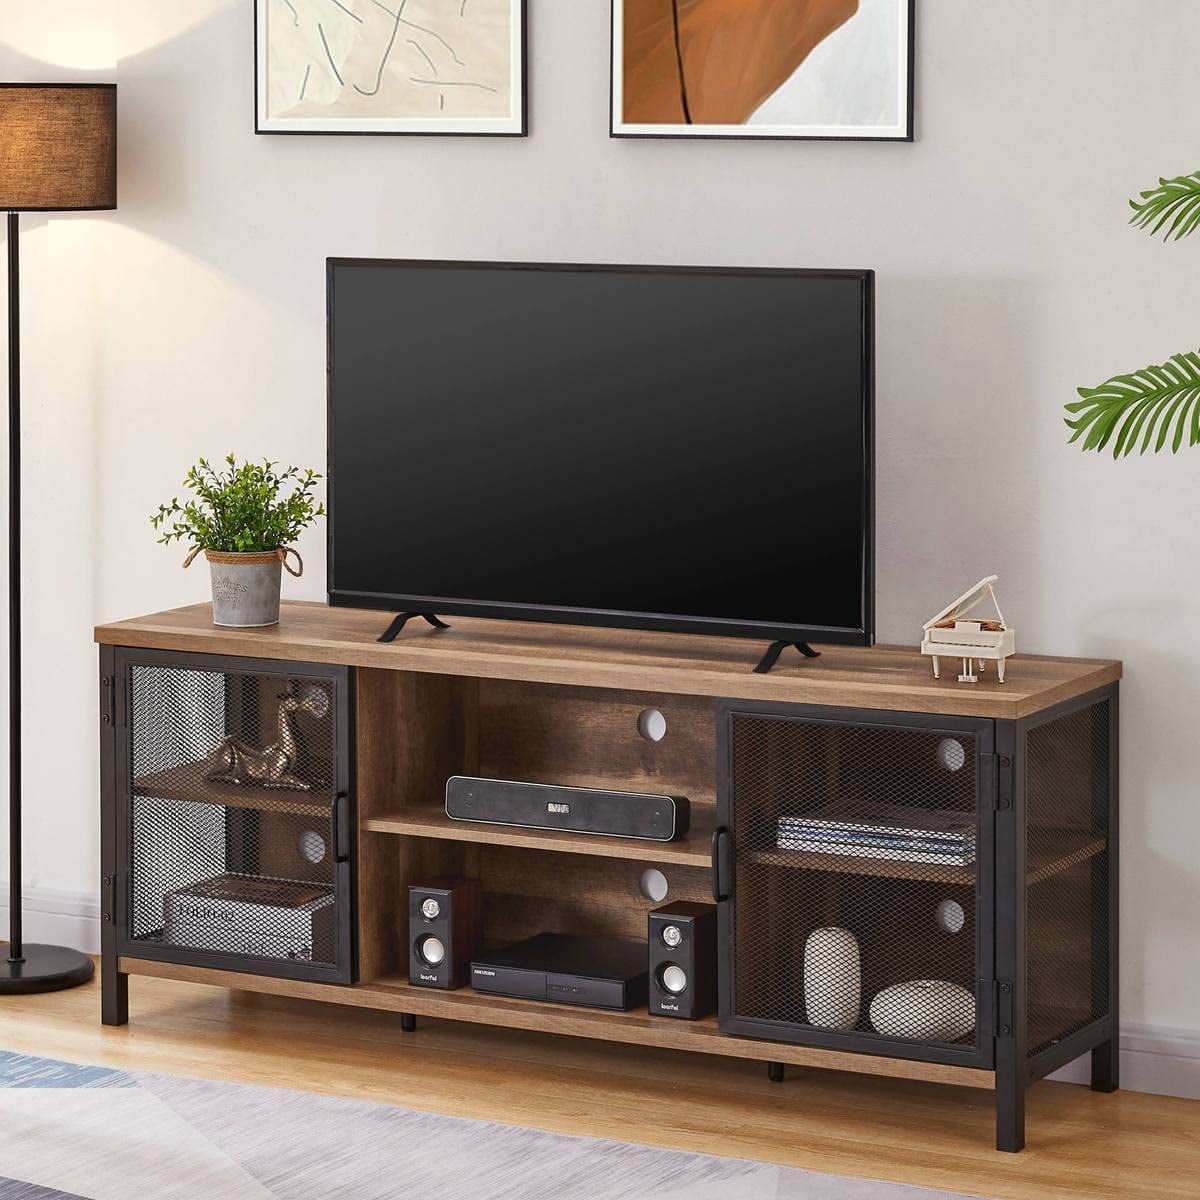 Zzpface Industrial Entertainment Center For Tvs Up To 65 Inch, Rustic Throughout Wide Entertainment Centers (View 12 of 20)